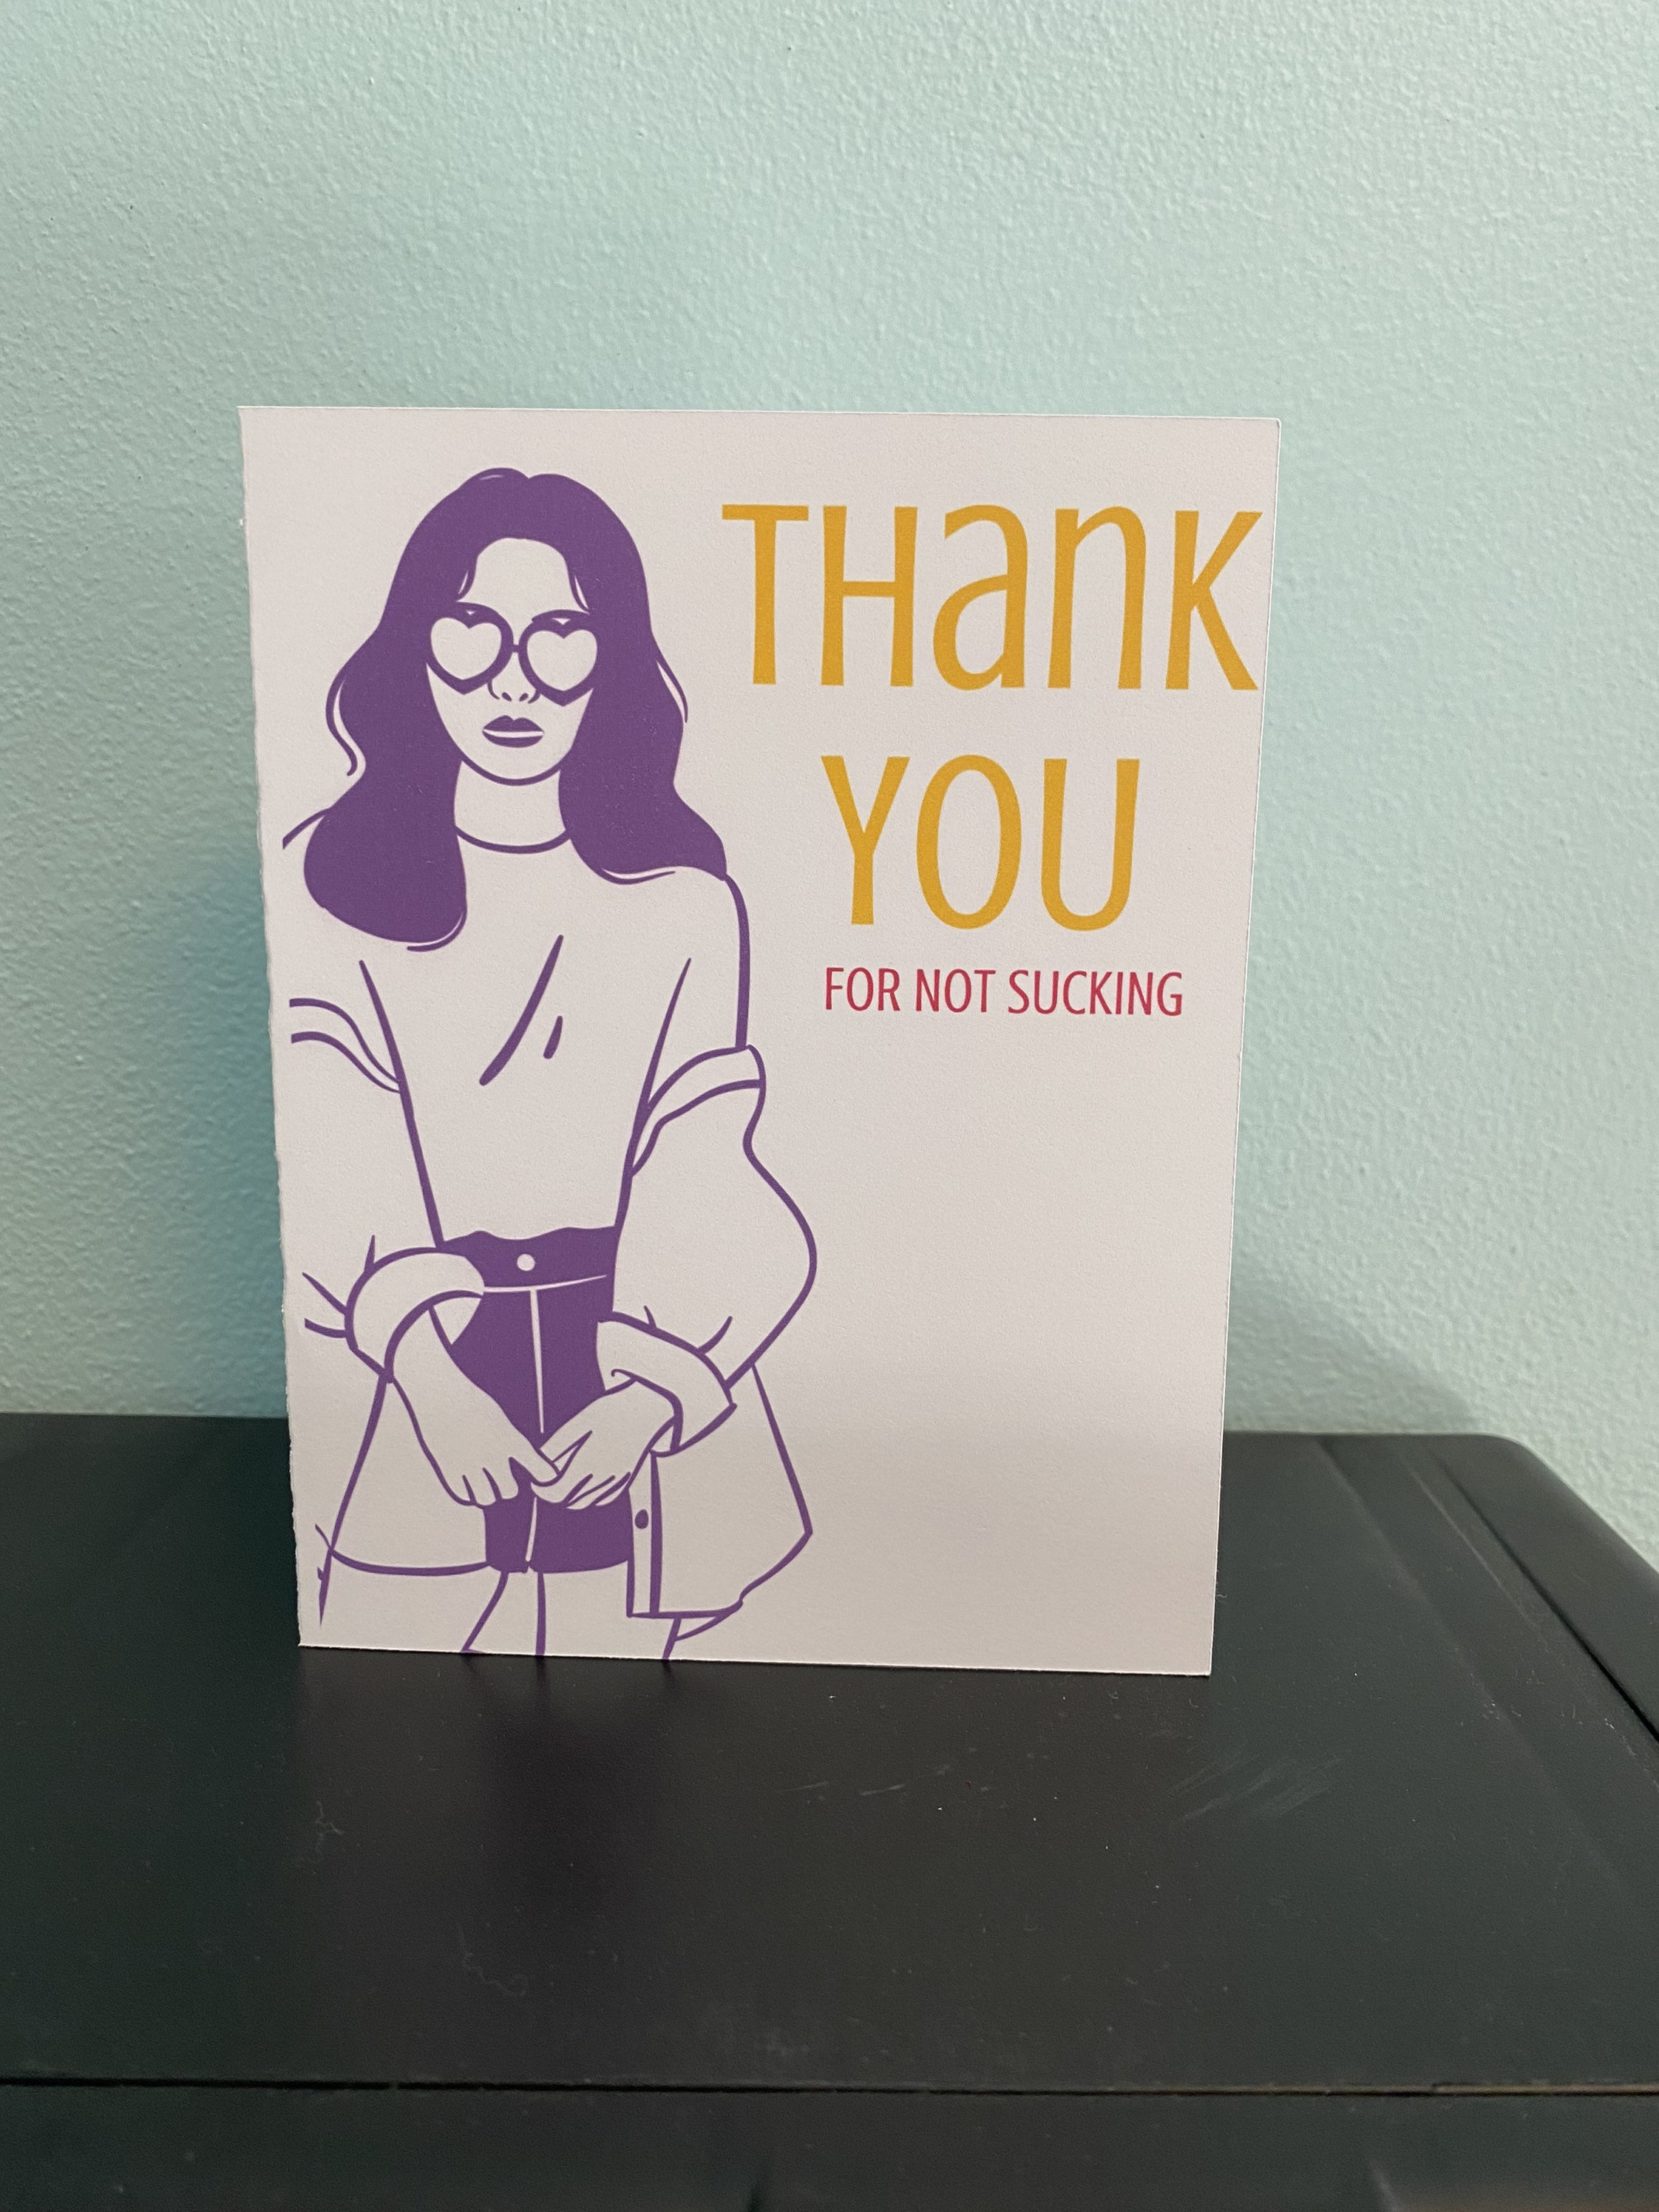 Funny Thank You Card Greeting Card Thanks for Not Sucking photo